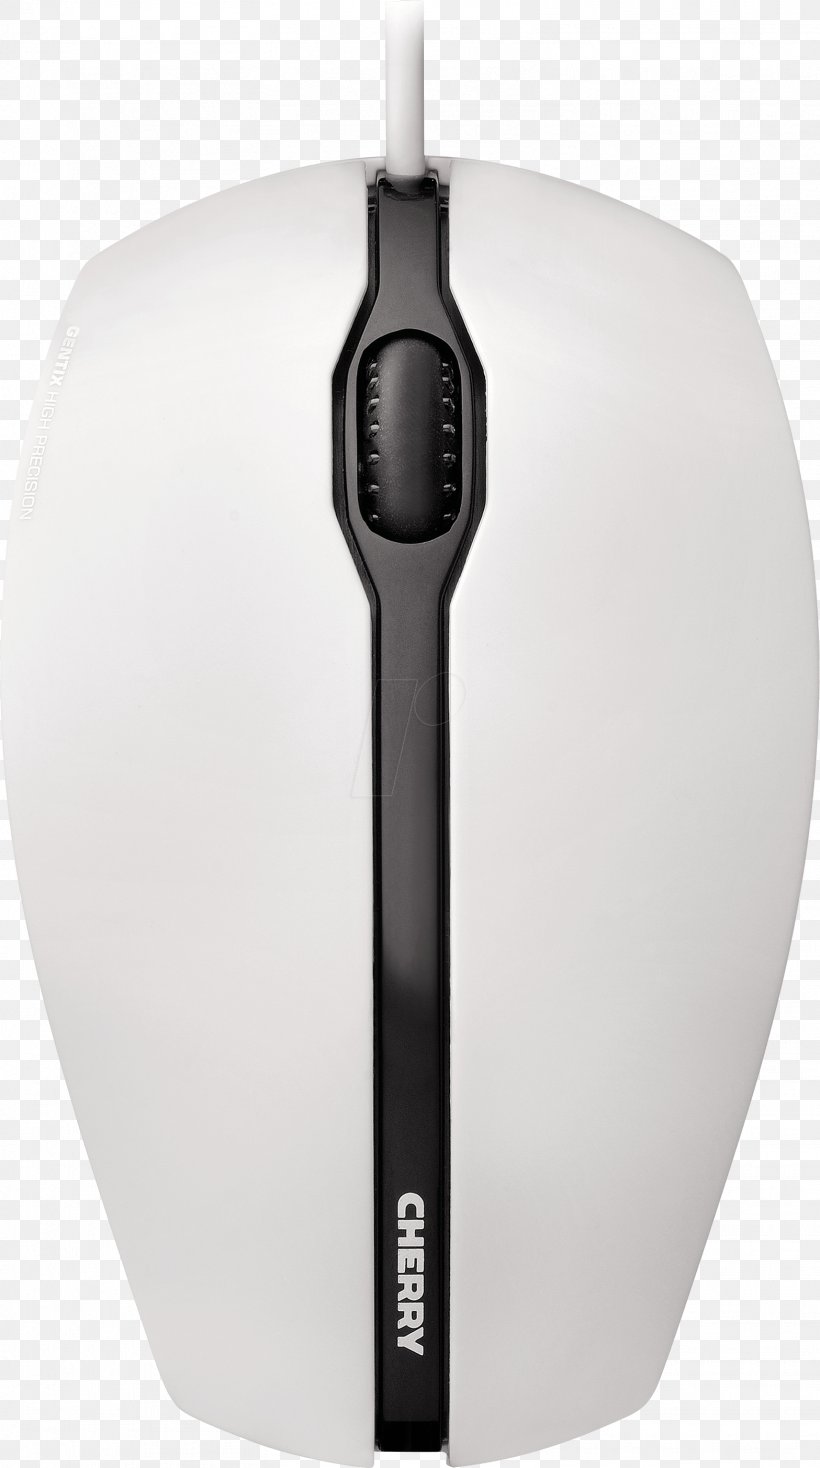 Computer Mouse Optical Mouse Trackball Kensington Computer Products Group Input Devices, PNG, 1567x2806px, Computer Mouse, Computer Component, Computer Hardware, Eizo, Electronic Device Download Free